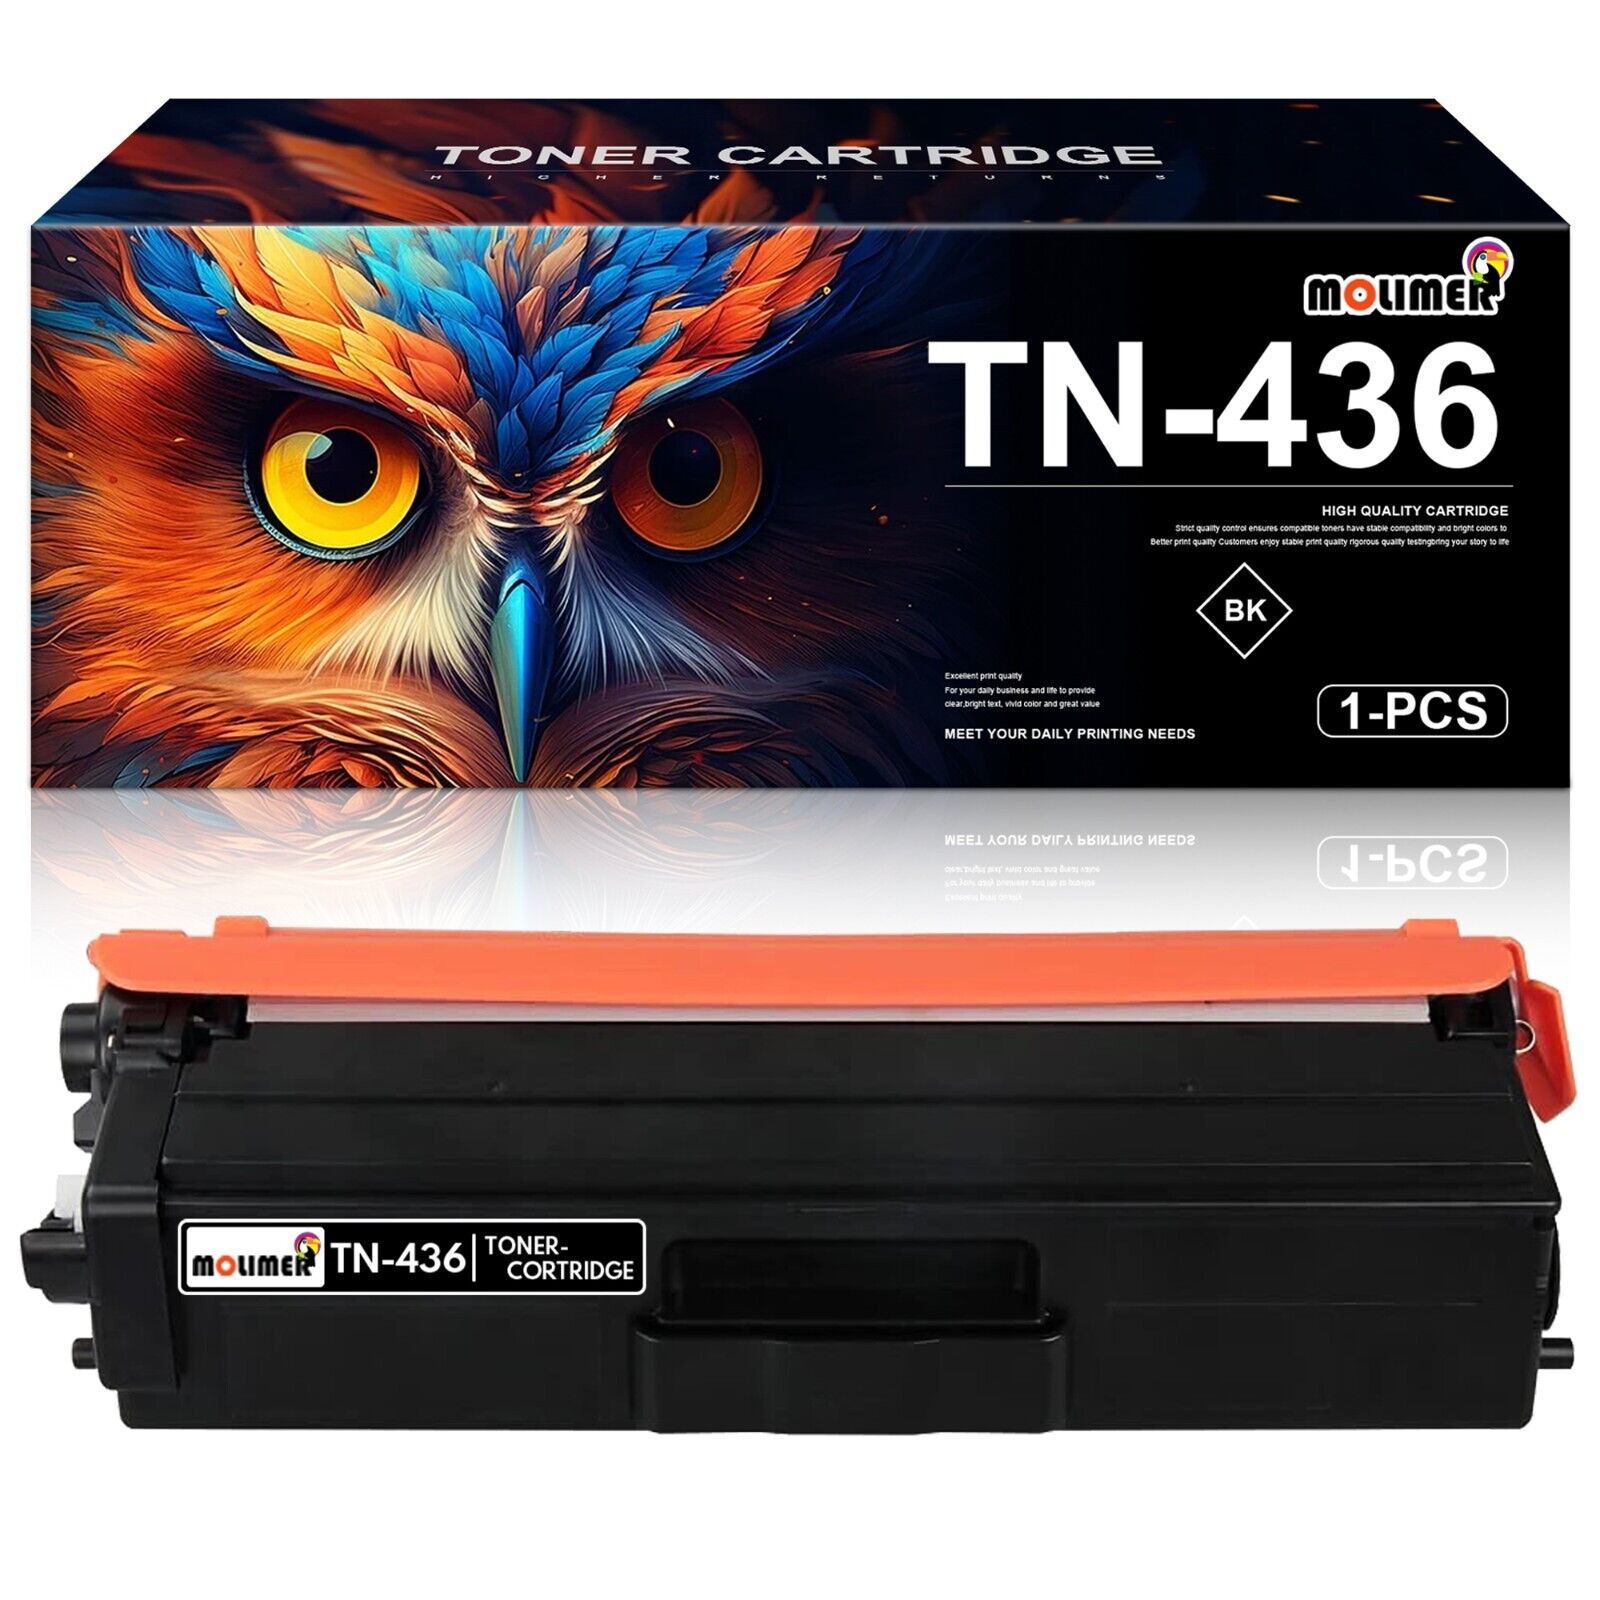 TN-436 Toner Catiridge High Yield Replacement for Brother TN436 HL-L8360CDW